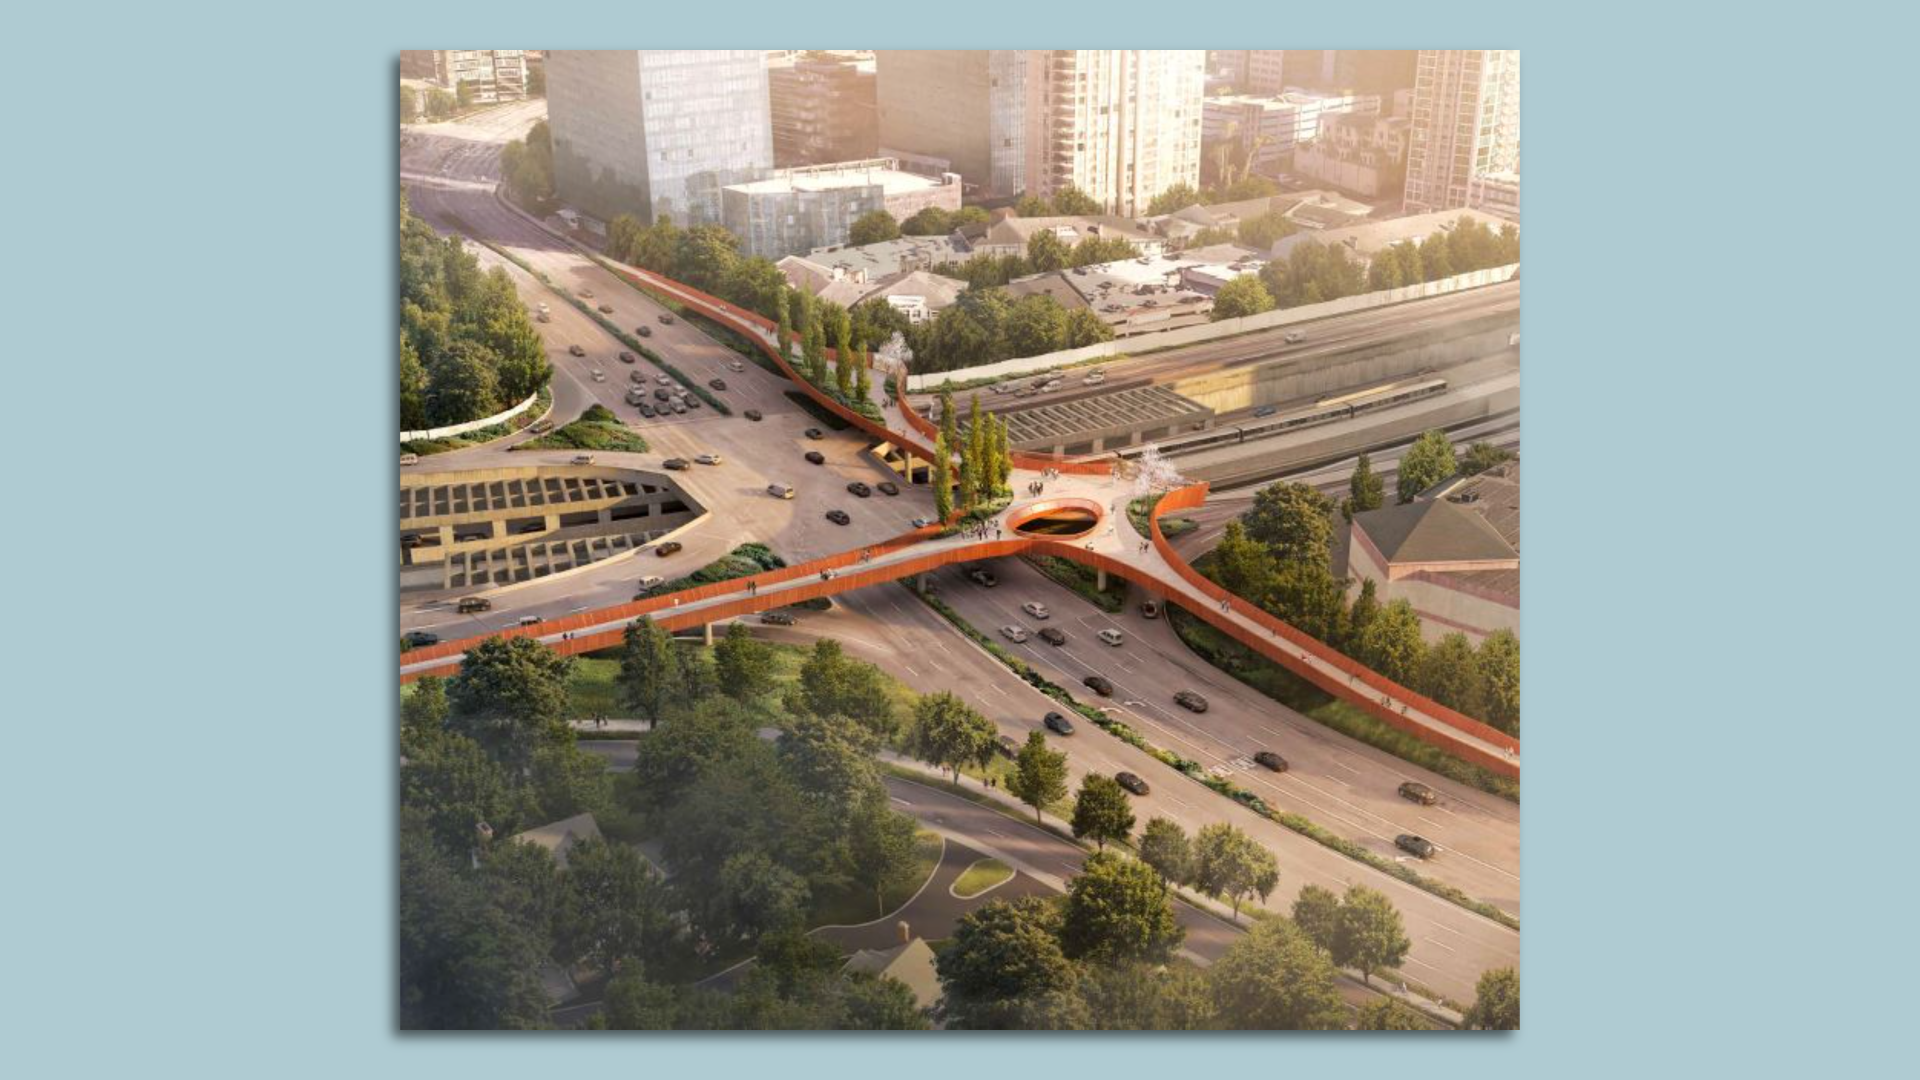 A rendering of a futuristic looking elevated bridge for pedestrians and bicyclists over a busy intersection and highway